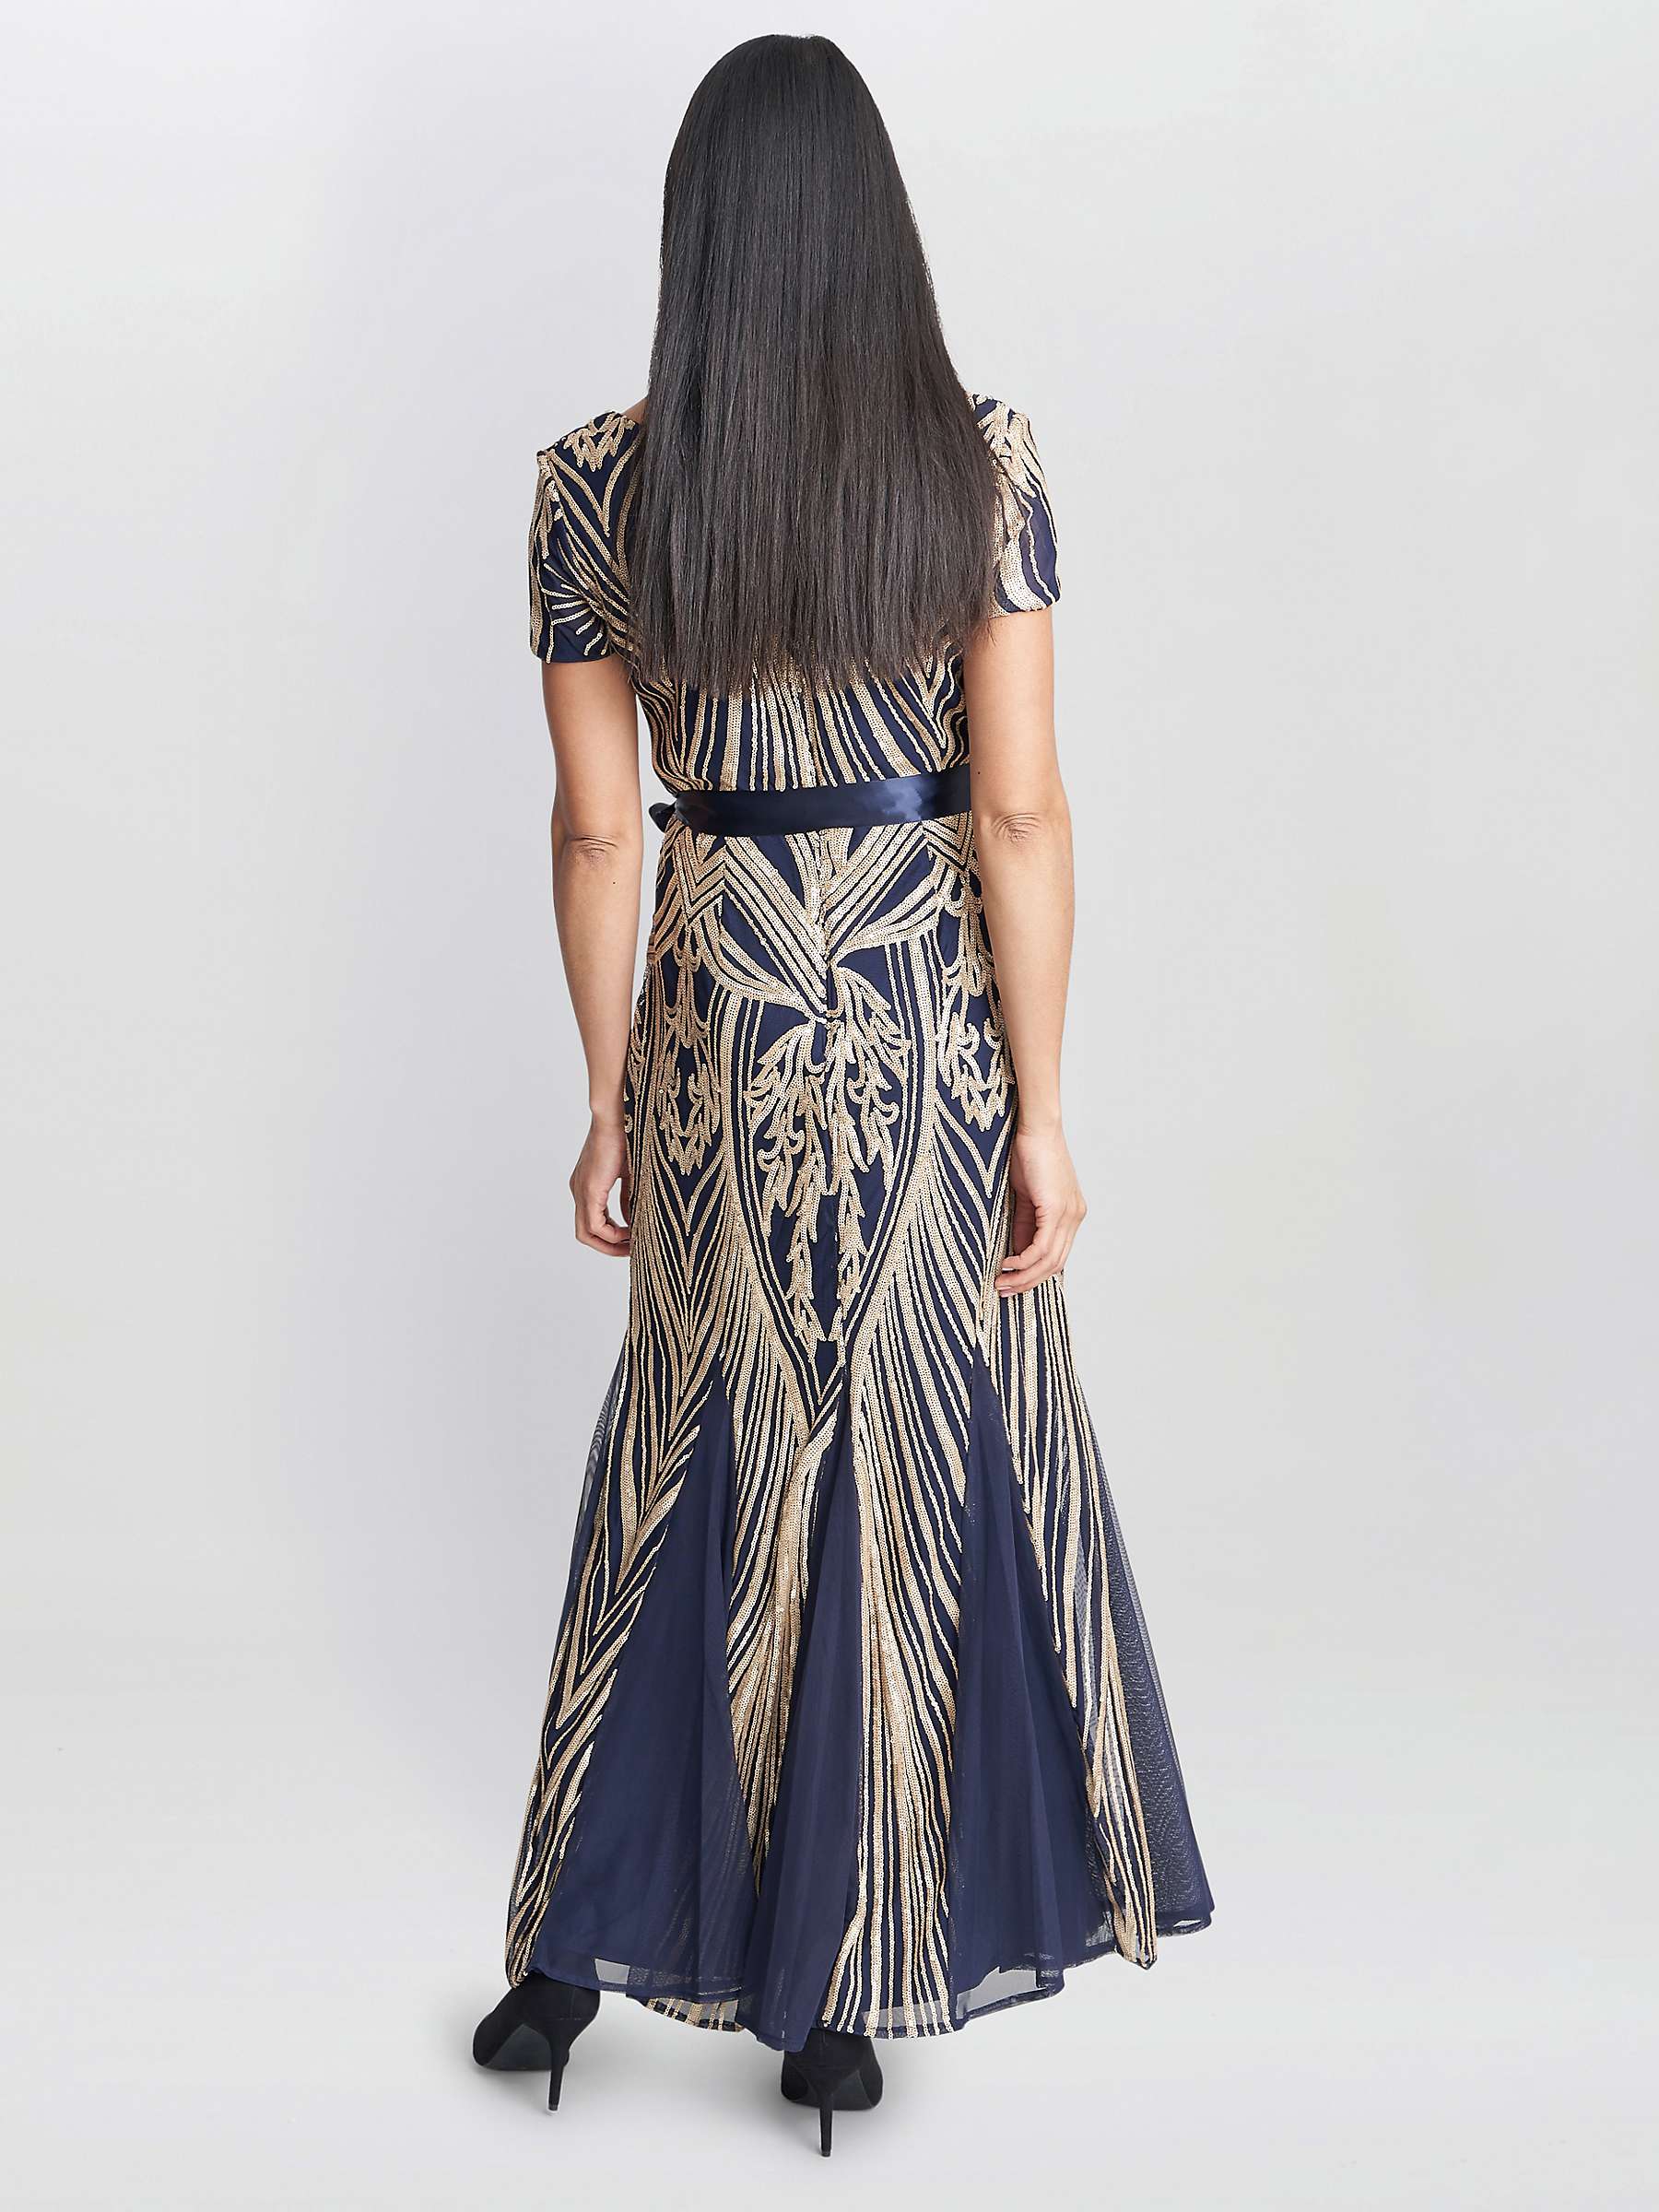 Buy Gina Bacconi Amelia Sweetheart Neck Embroidered Maxi Dress, Navy/Gold Online at johnlewis.com